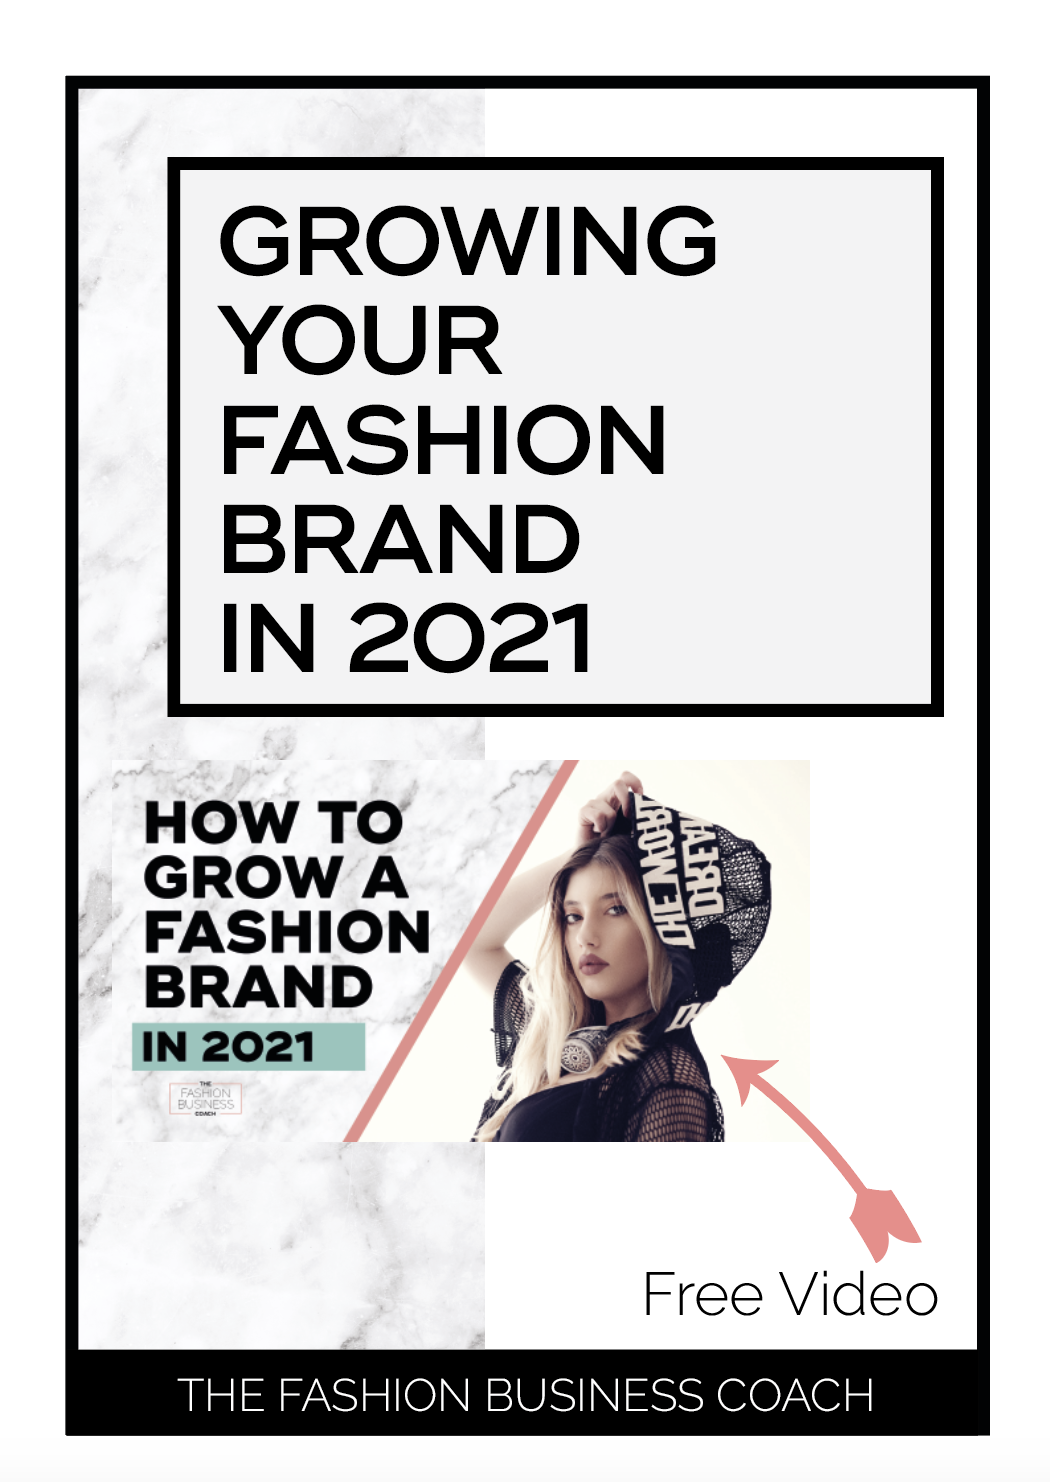 Growing Your Fashion Brand in 2021 4.png